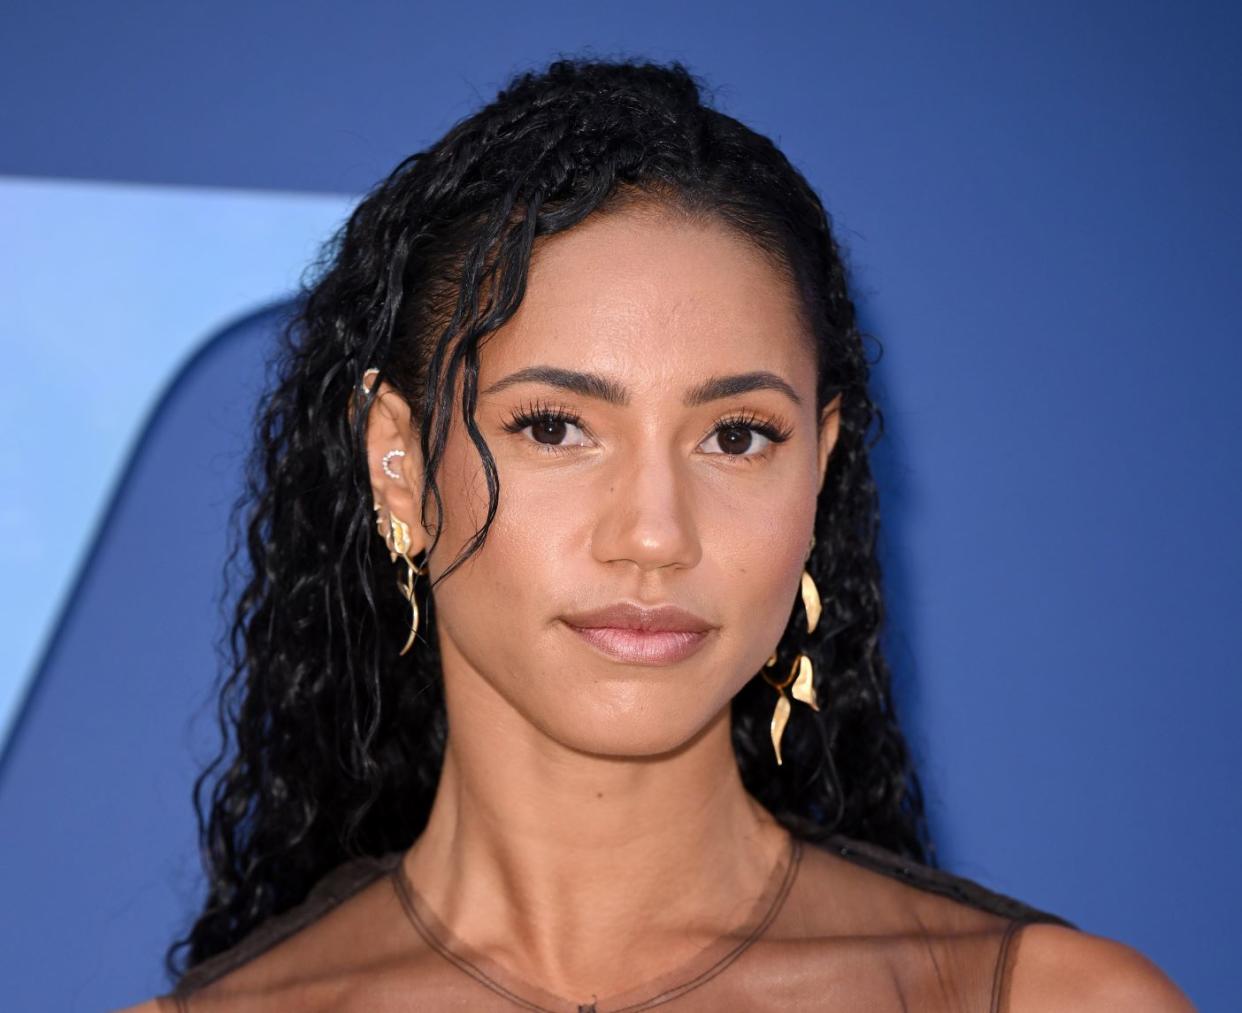 Vick Hope has spoken about losing a friend. (WireImage)